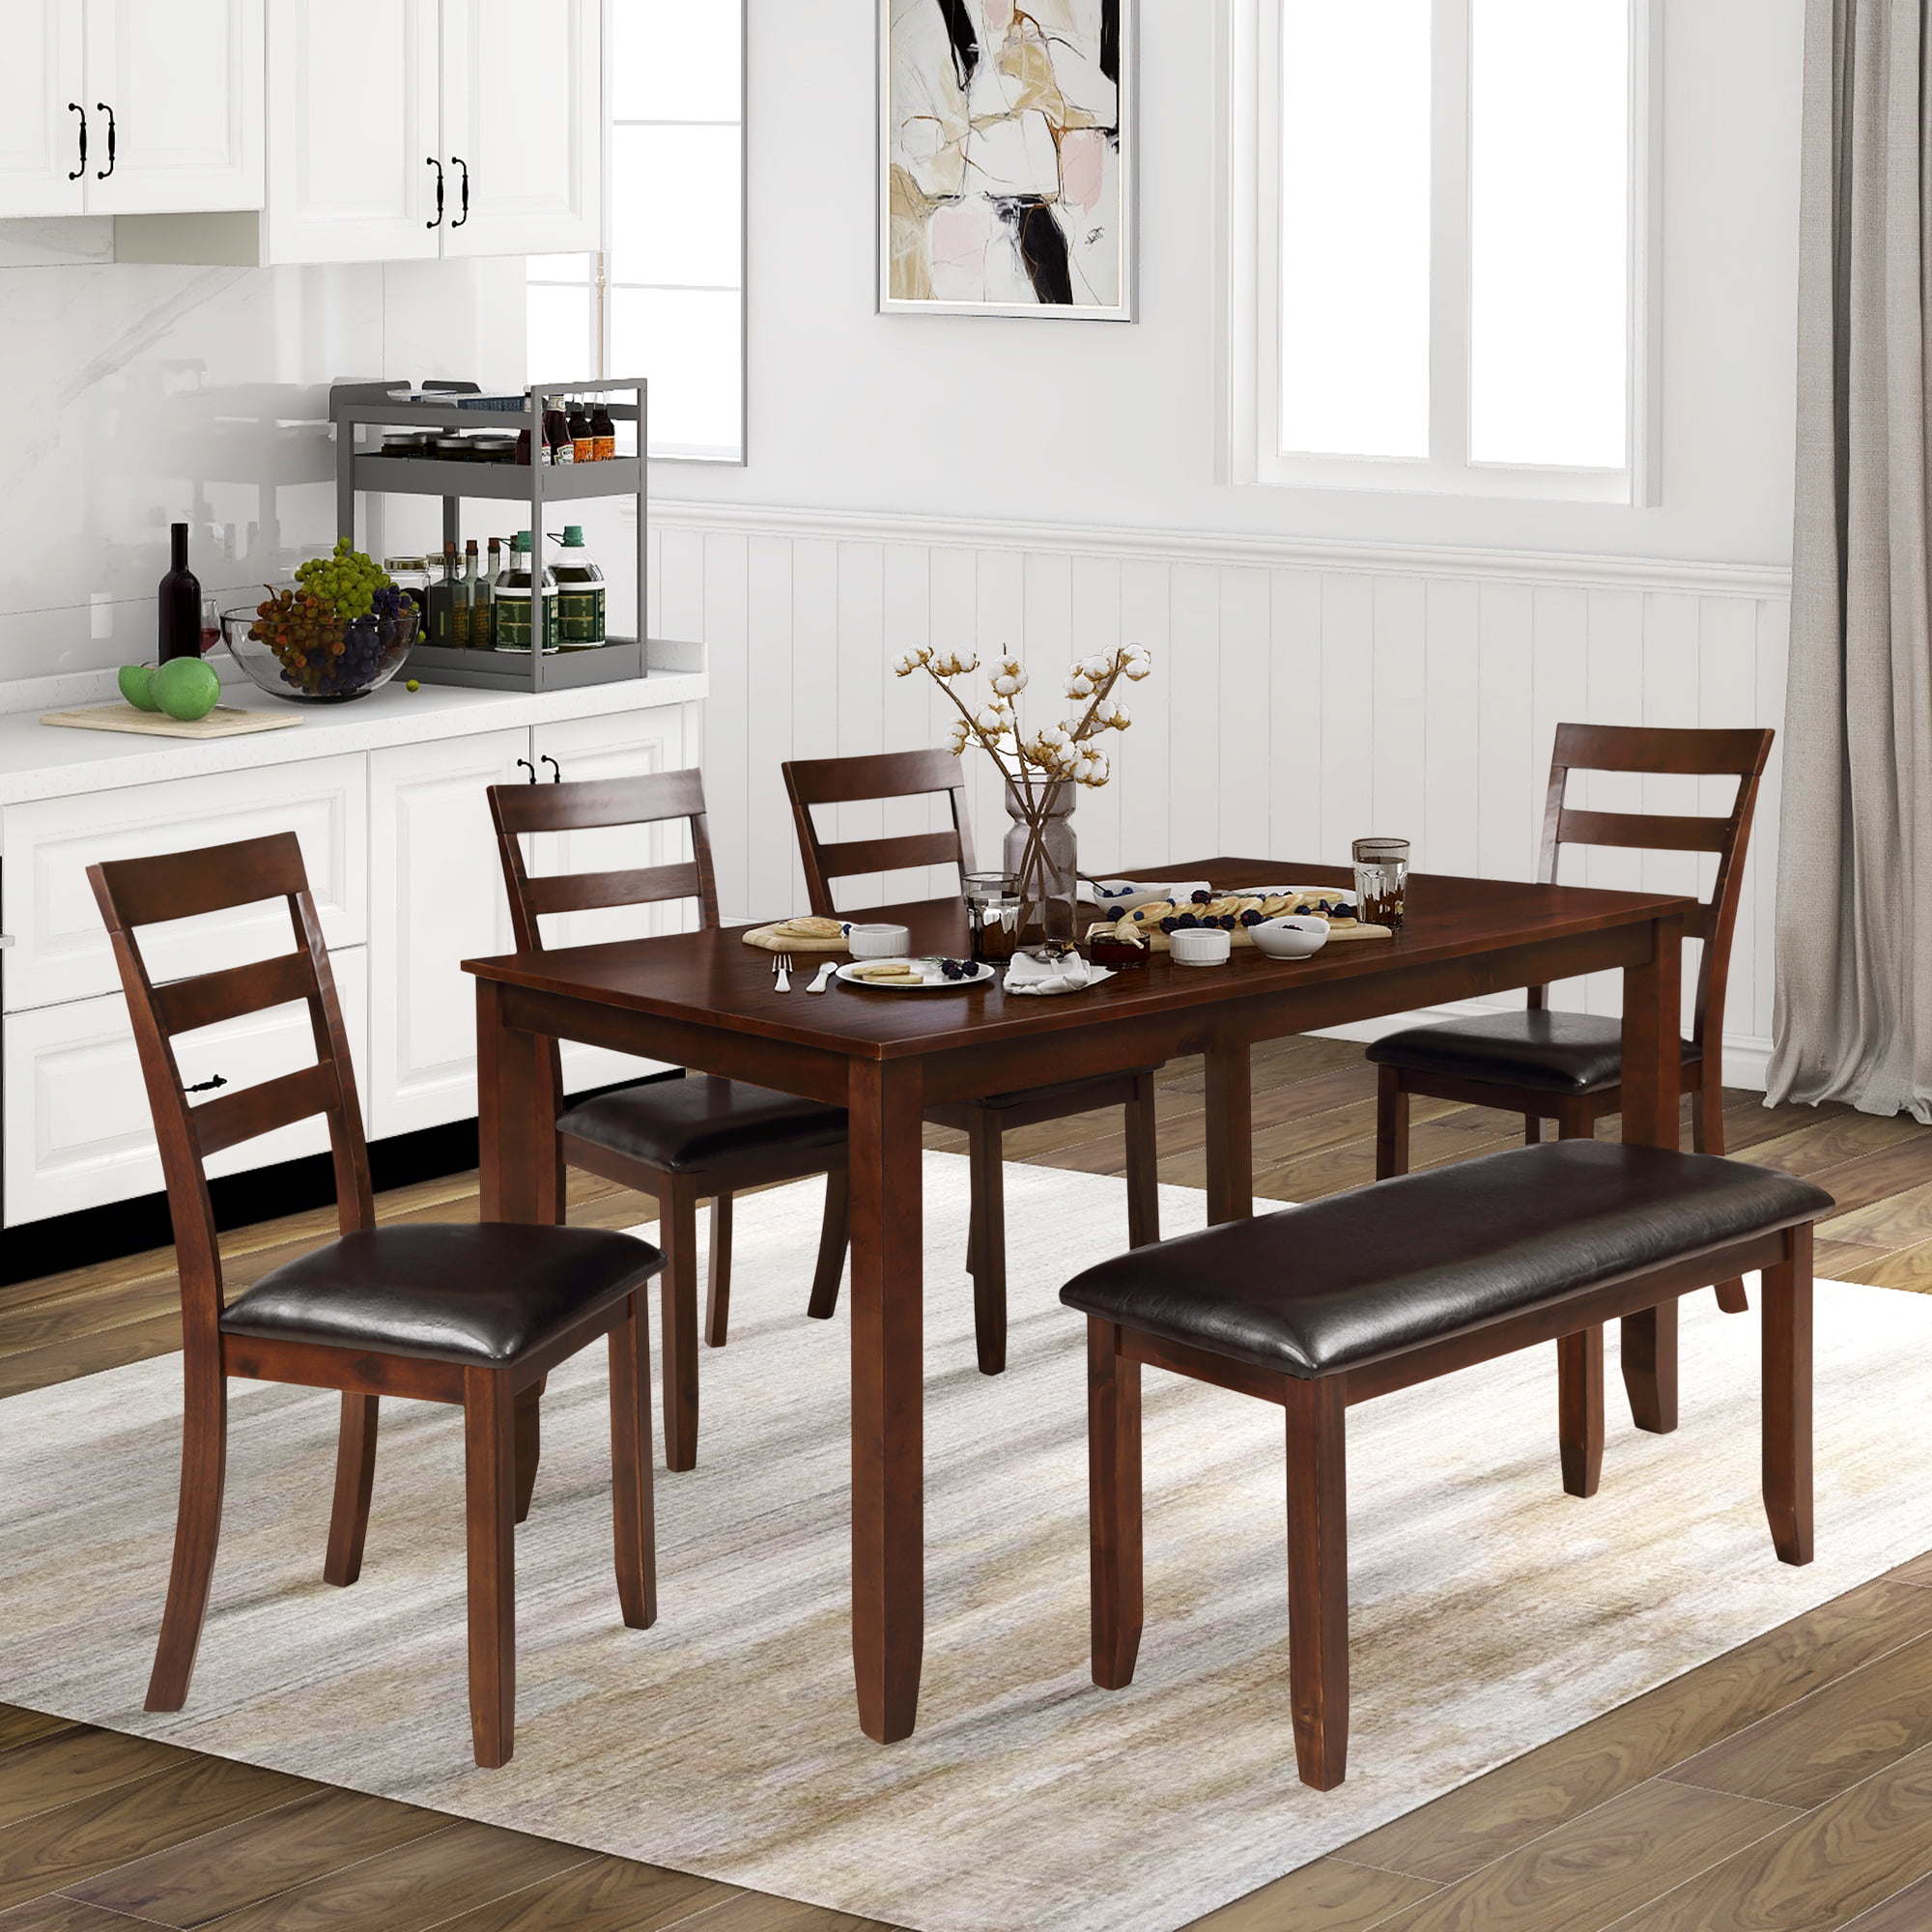 6 Piece Dining Table Set, Modern Dining Table Sets with 4 Dining Chairs ...